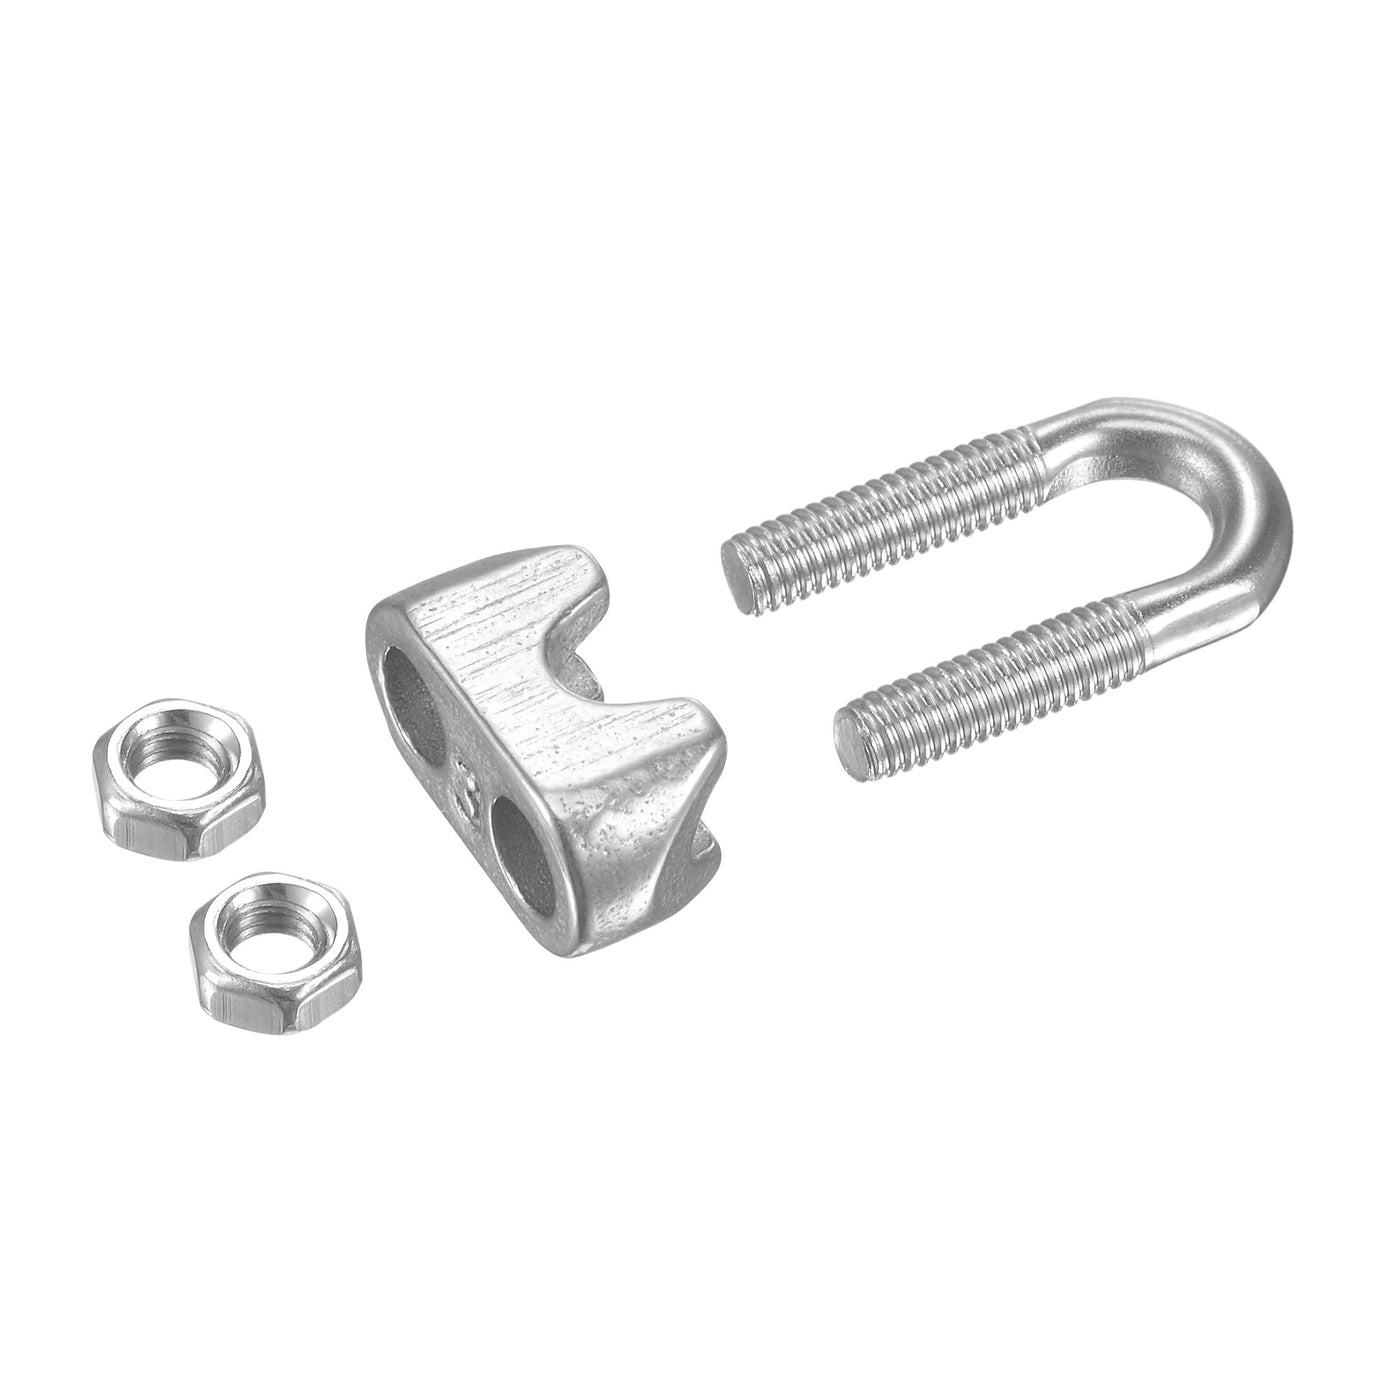 uxcell Uxcell Wire Rope Cable Clip Kit for M3, Included Rope Clamp 5Pcs and Thimble Rigging 5Pcs, 304 Stainless Steel U Bolt Saddle Fastener